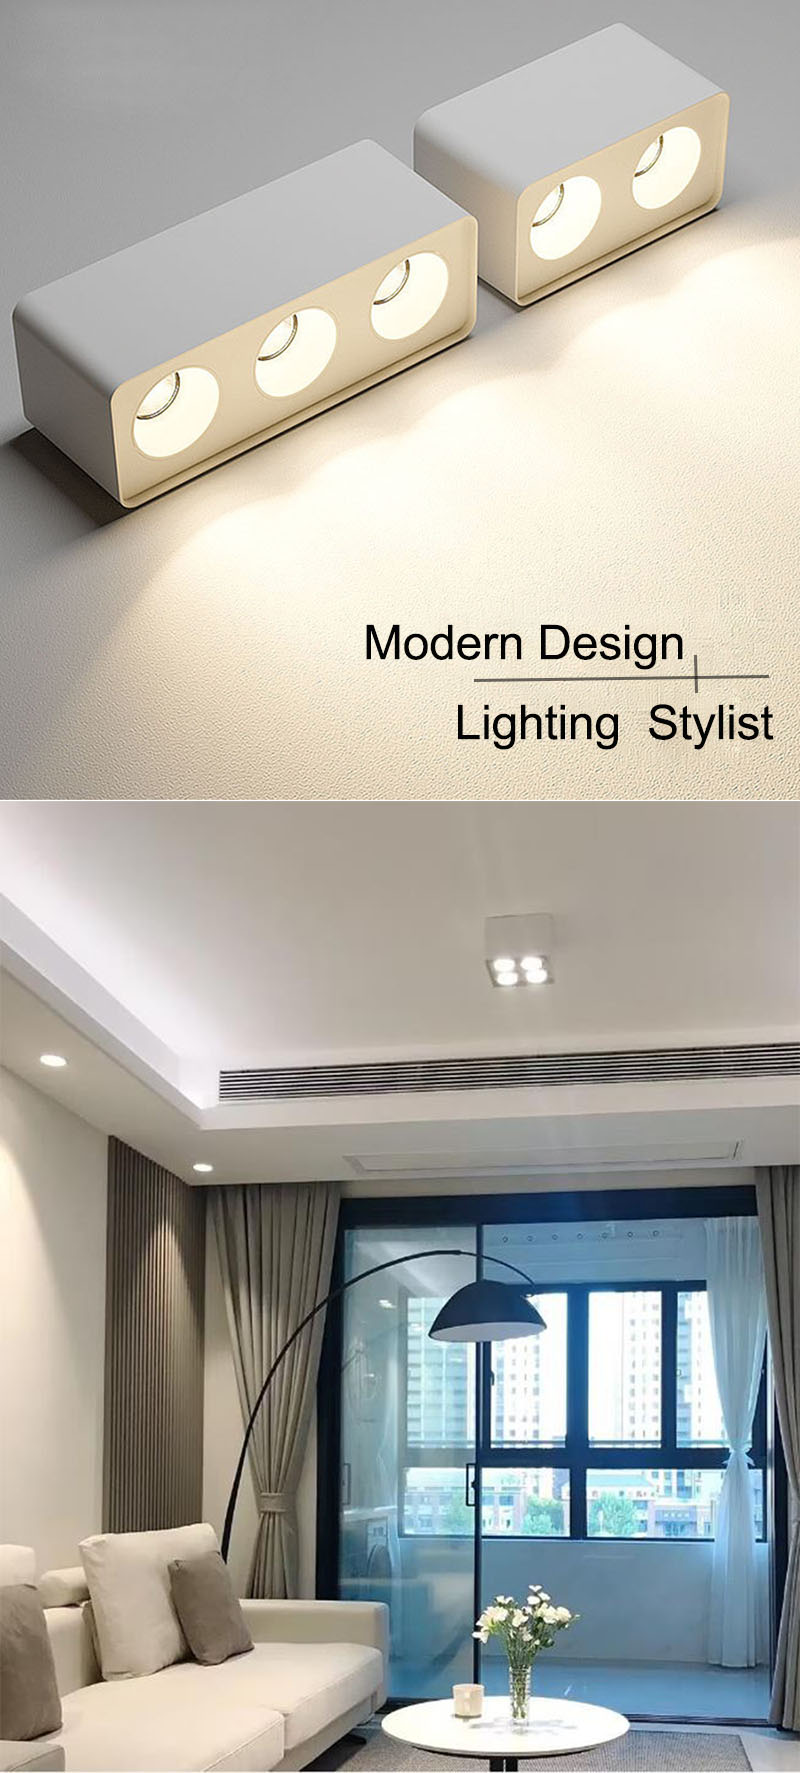 Recommended minimalist main lighting styles